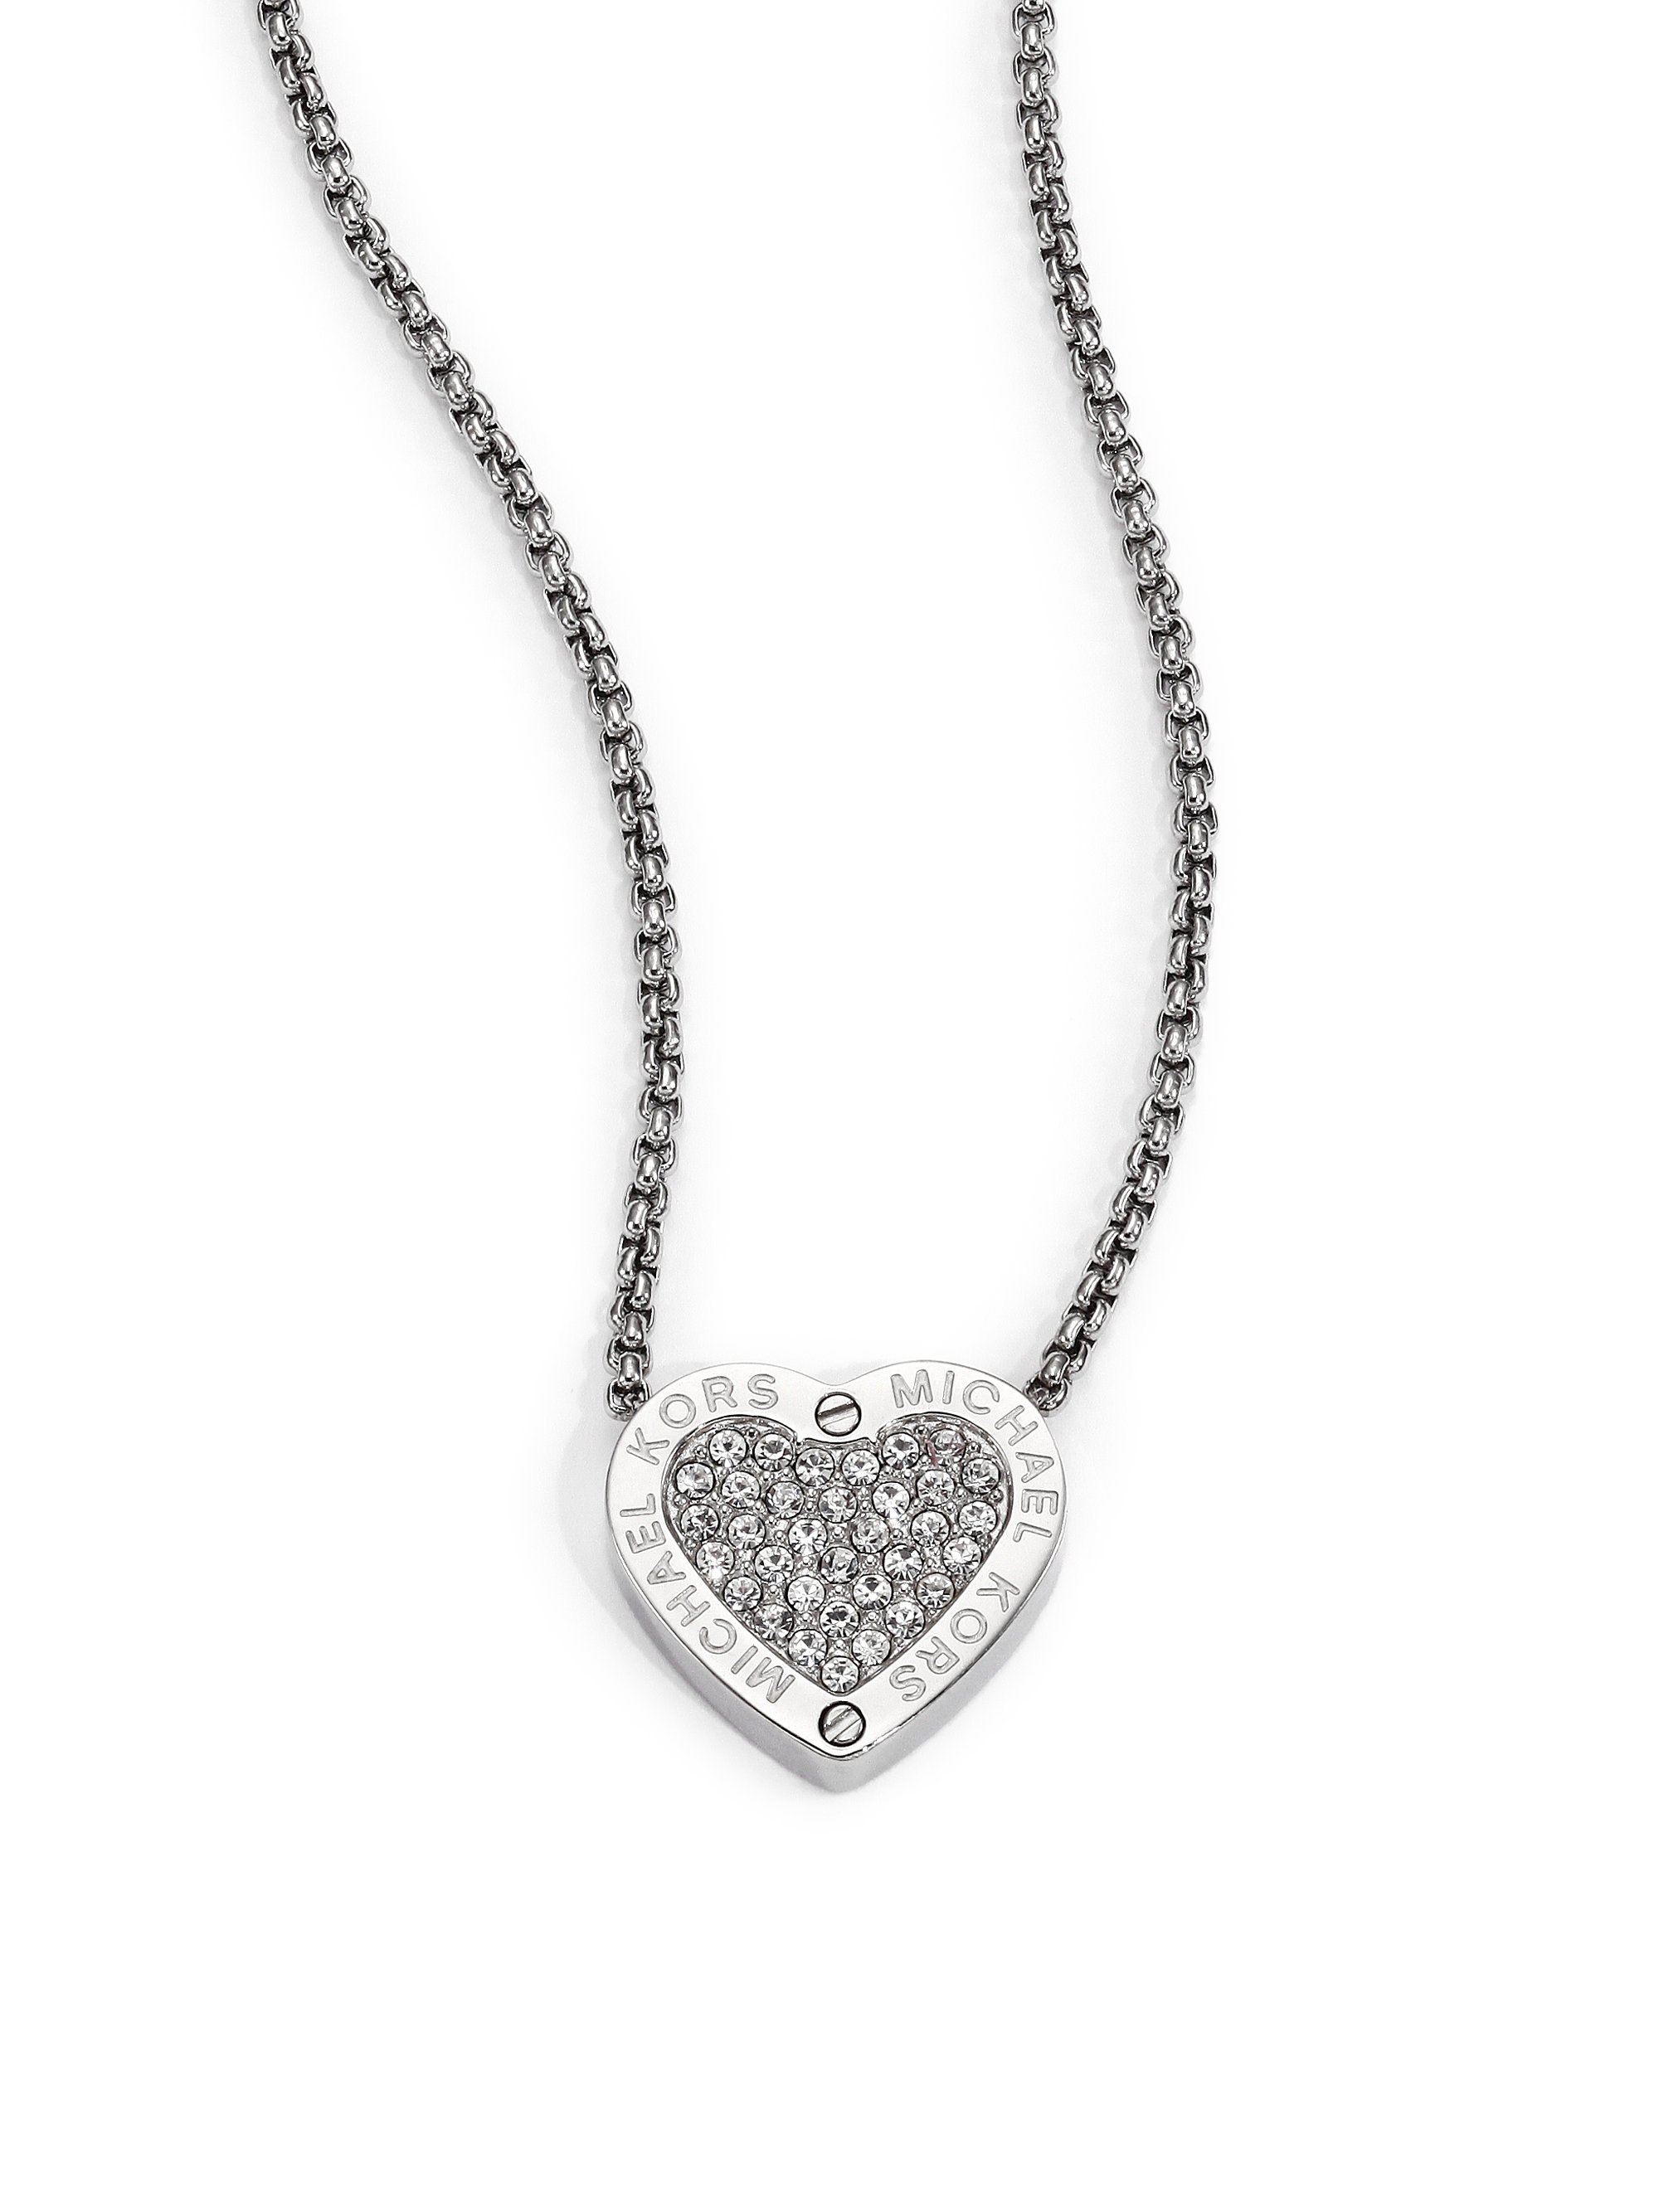 Lyst - Michael Kors Heritage Hearts Pave Necklace/silvertone in Metallic